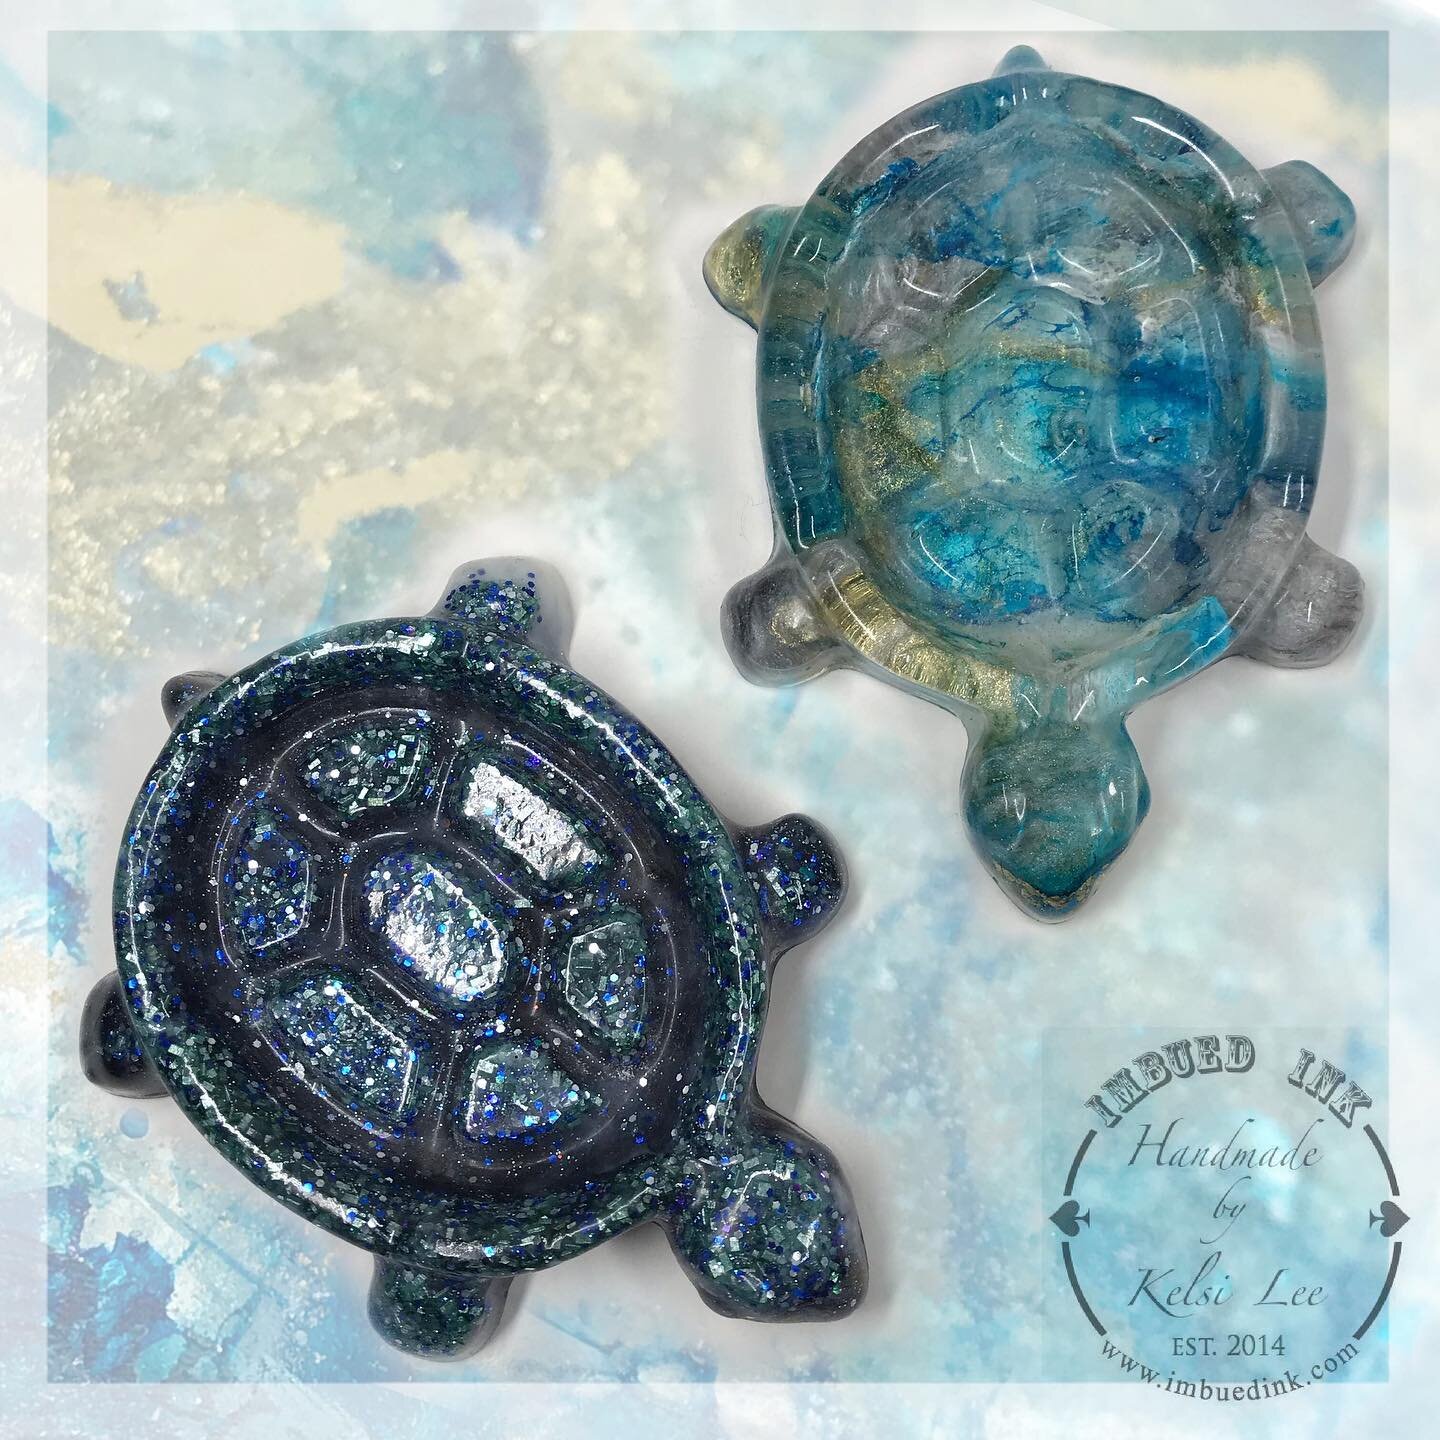 ✨ Something new, something #blue 💙
More cute turtle dishes for you! ☺️ 🐢 
I love to make these, they add a cute but functional touch to your home decor! with several possible uses. 

&bull; use as a soap rise 🧼 
&bull; jewelry dish 💎
&bull; spoon